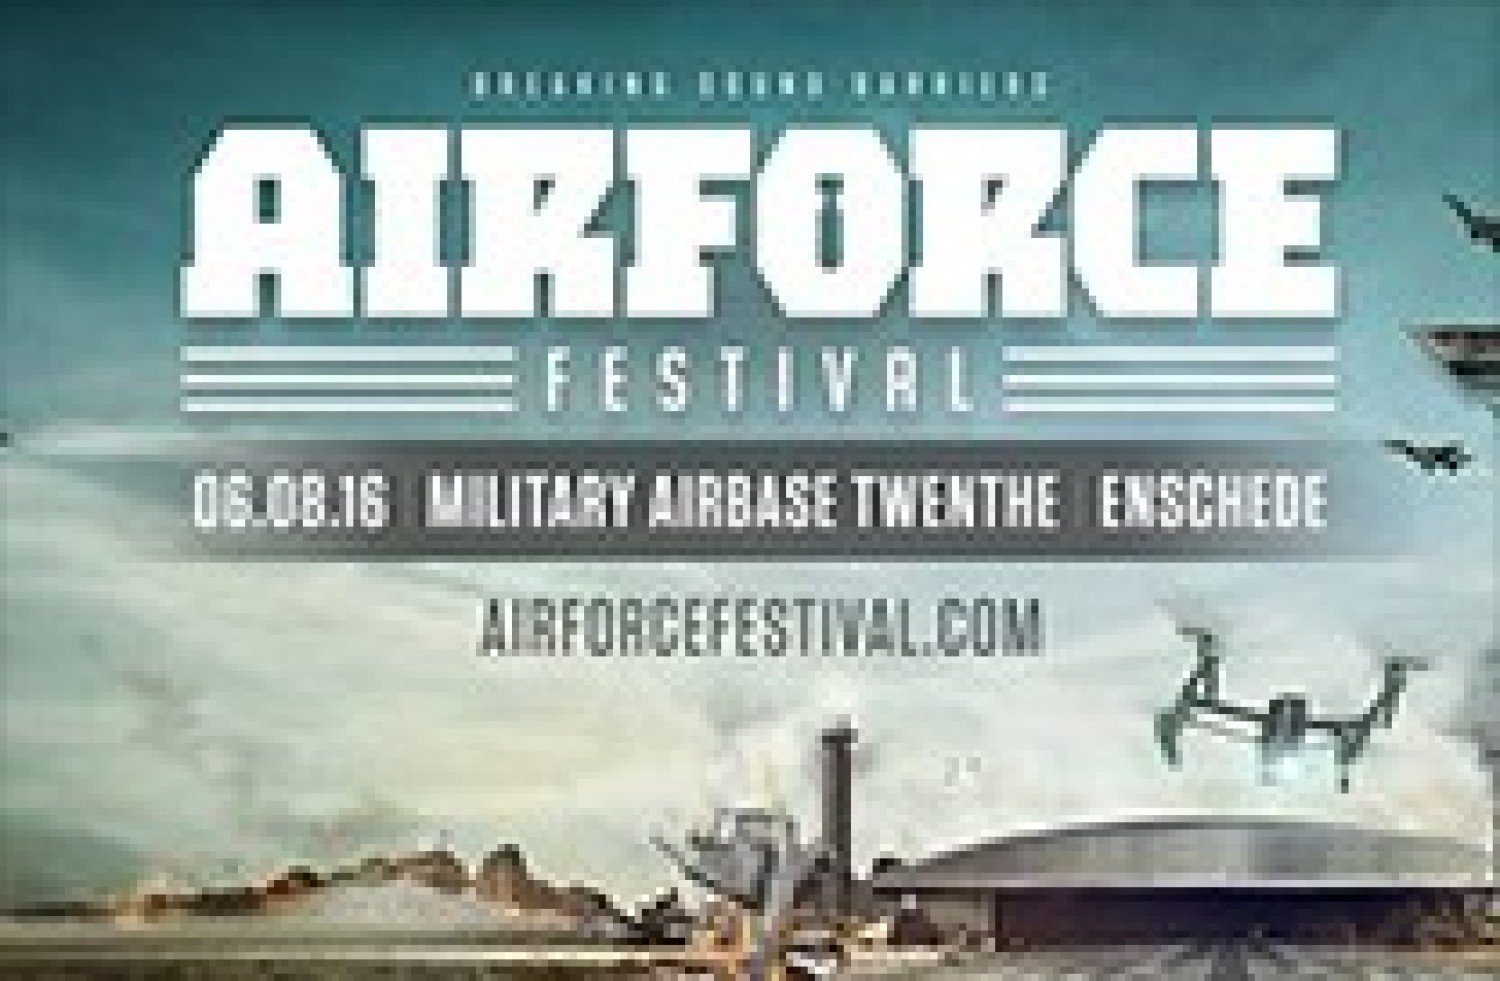 Party report: Airforce Festival, Enschede (06-08-2016)